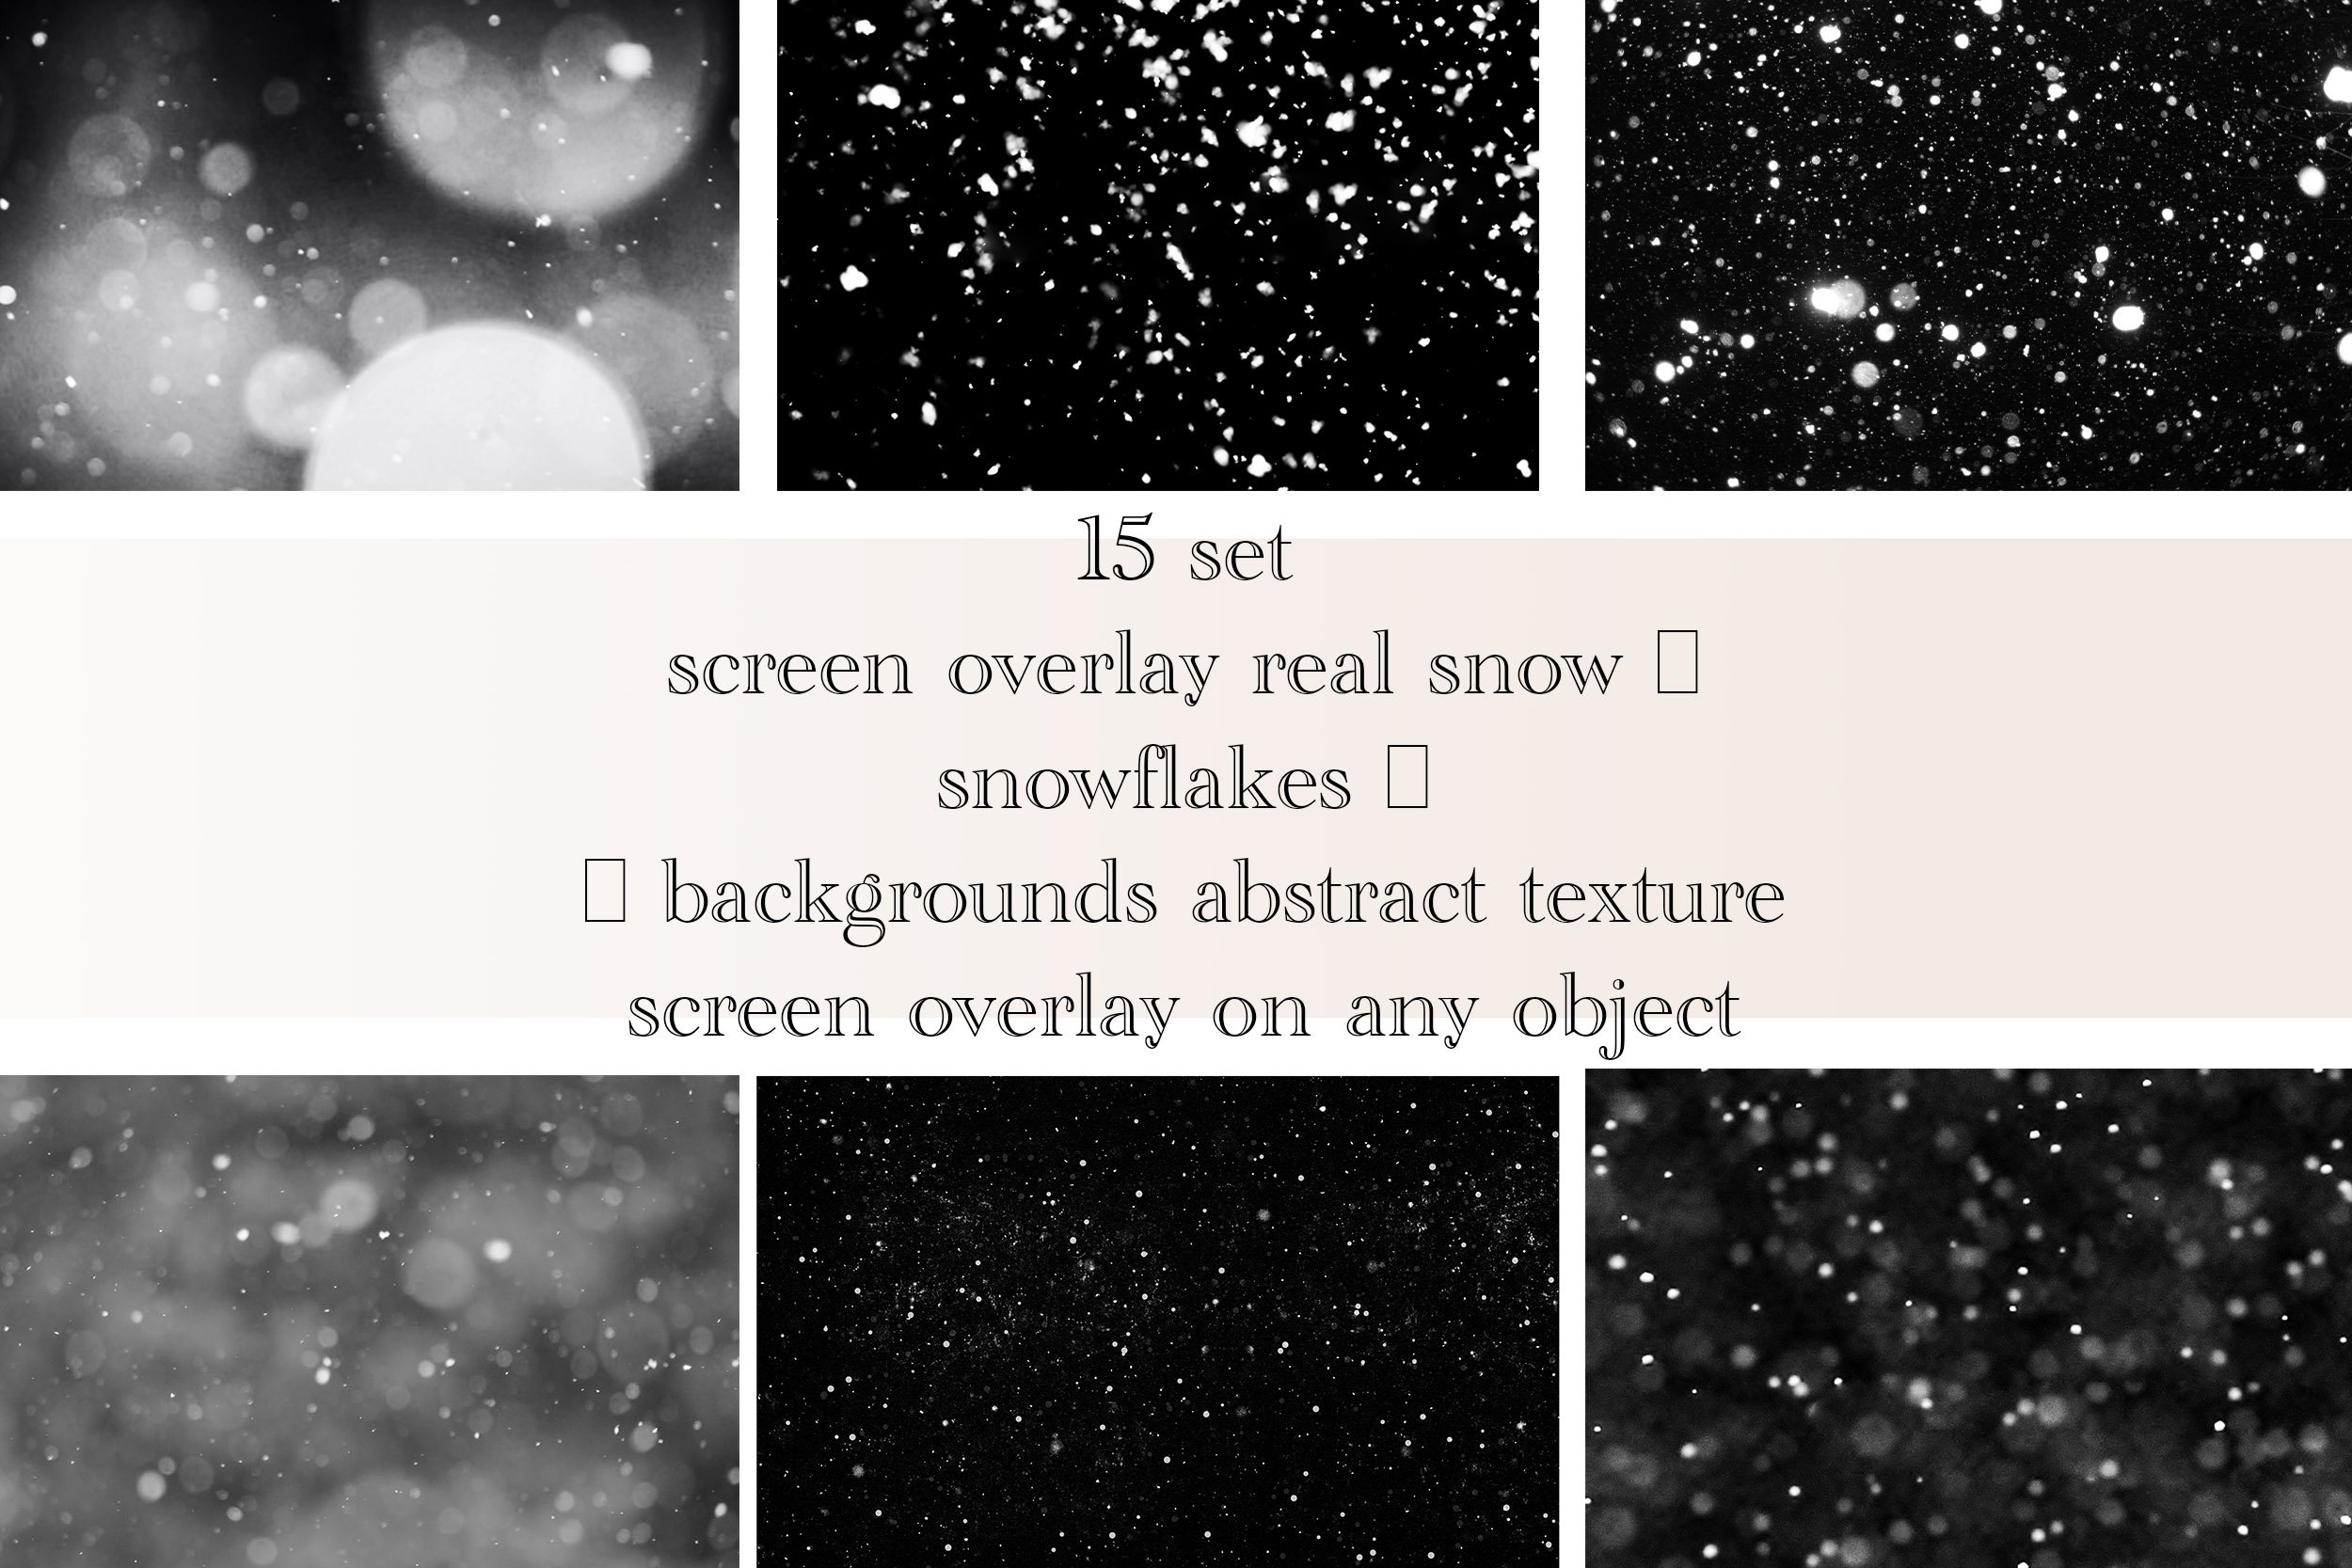 overlay real snow screen bundlecover image.